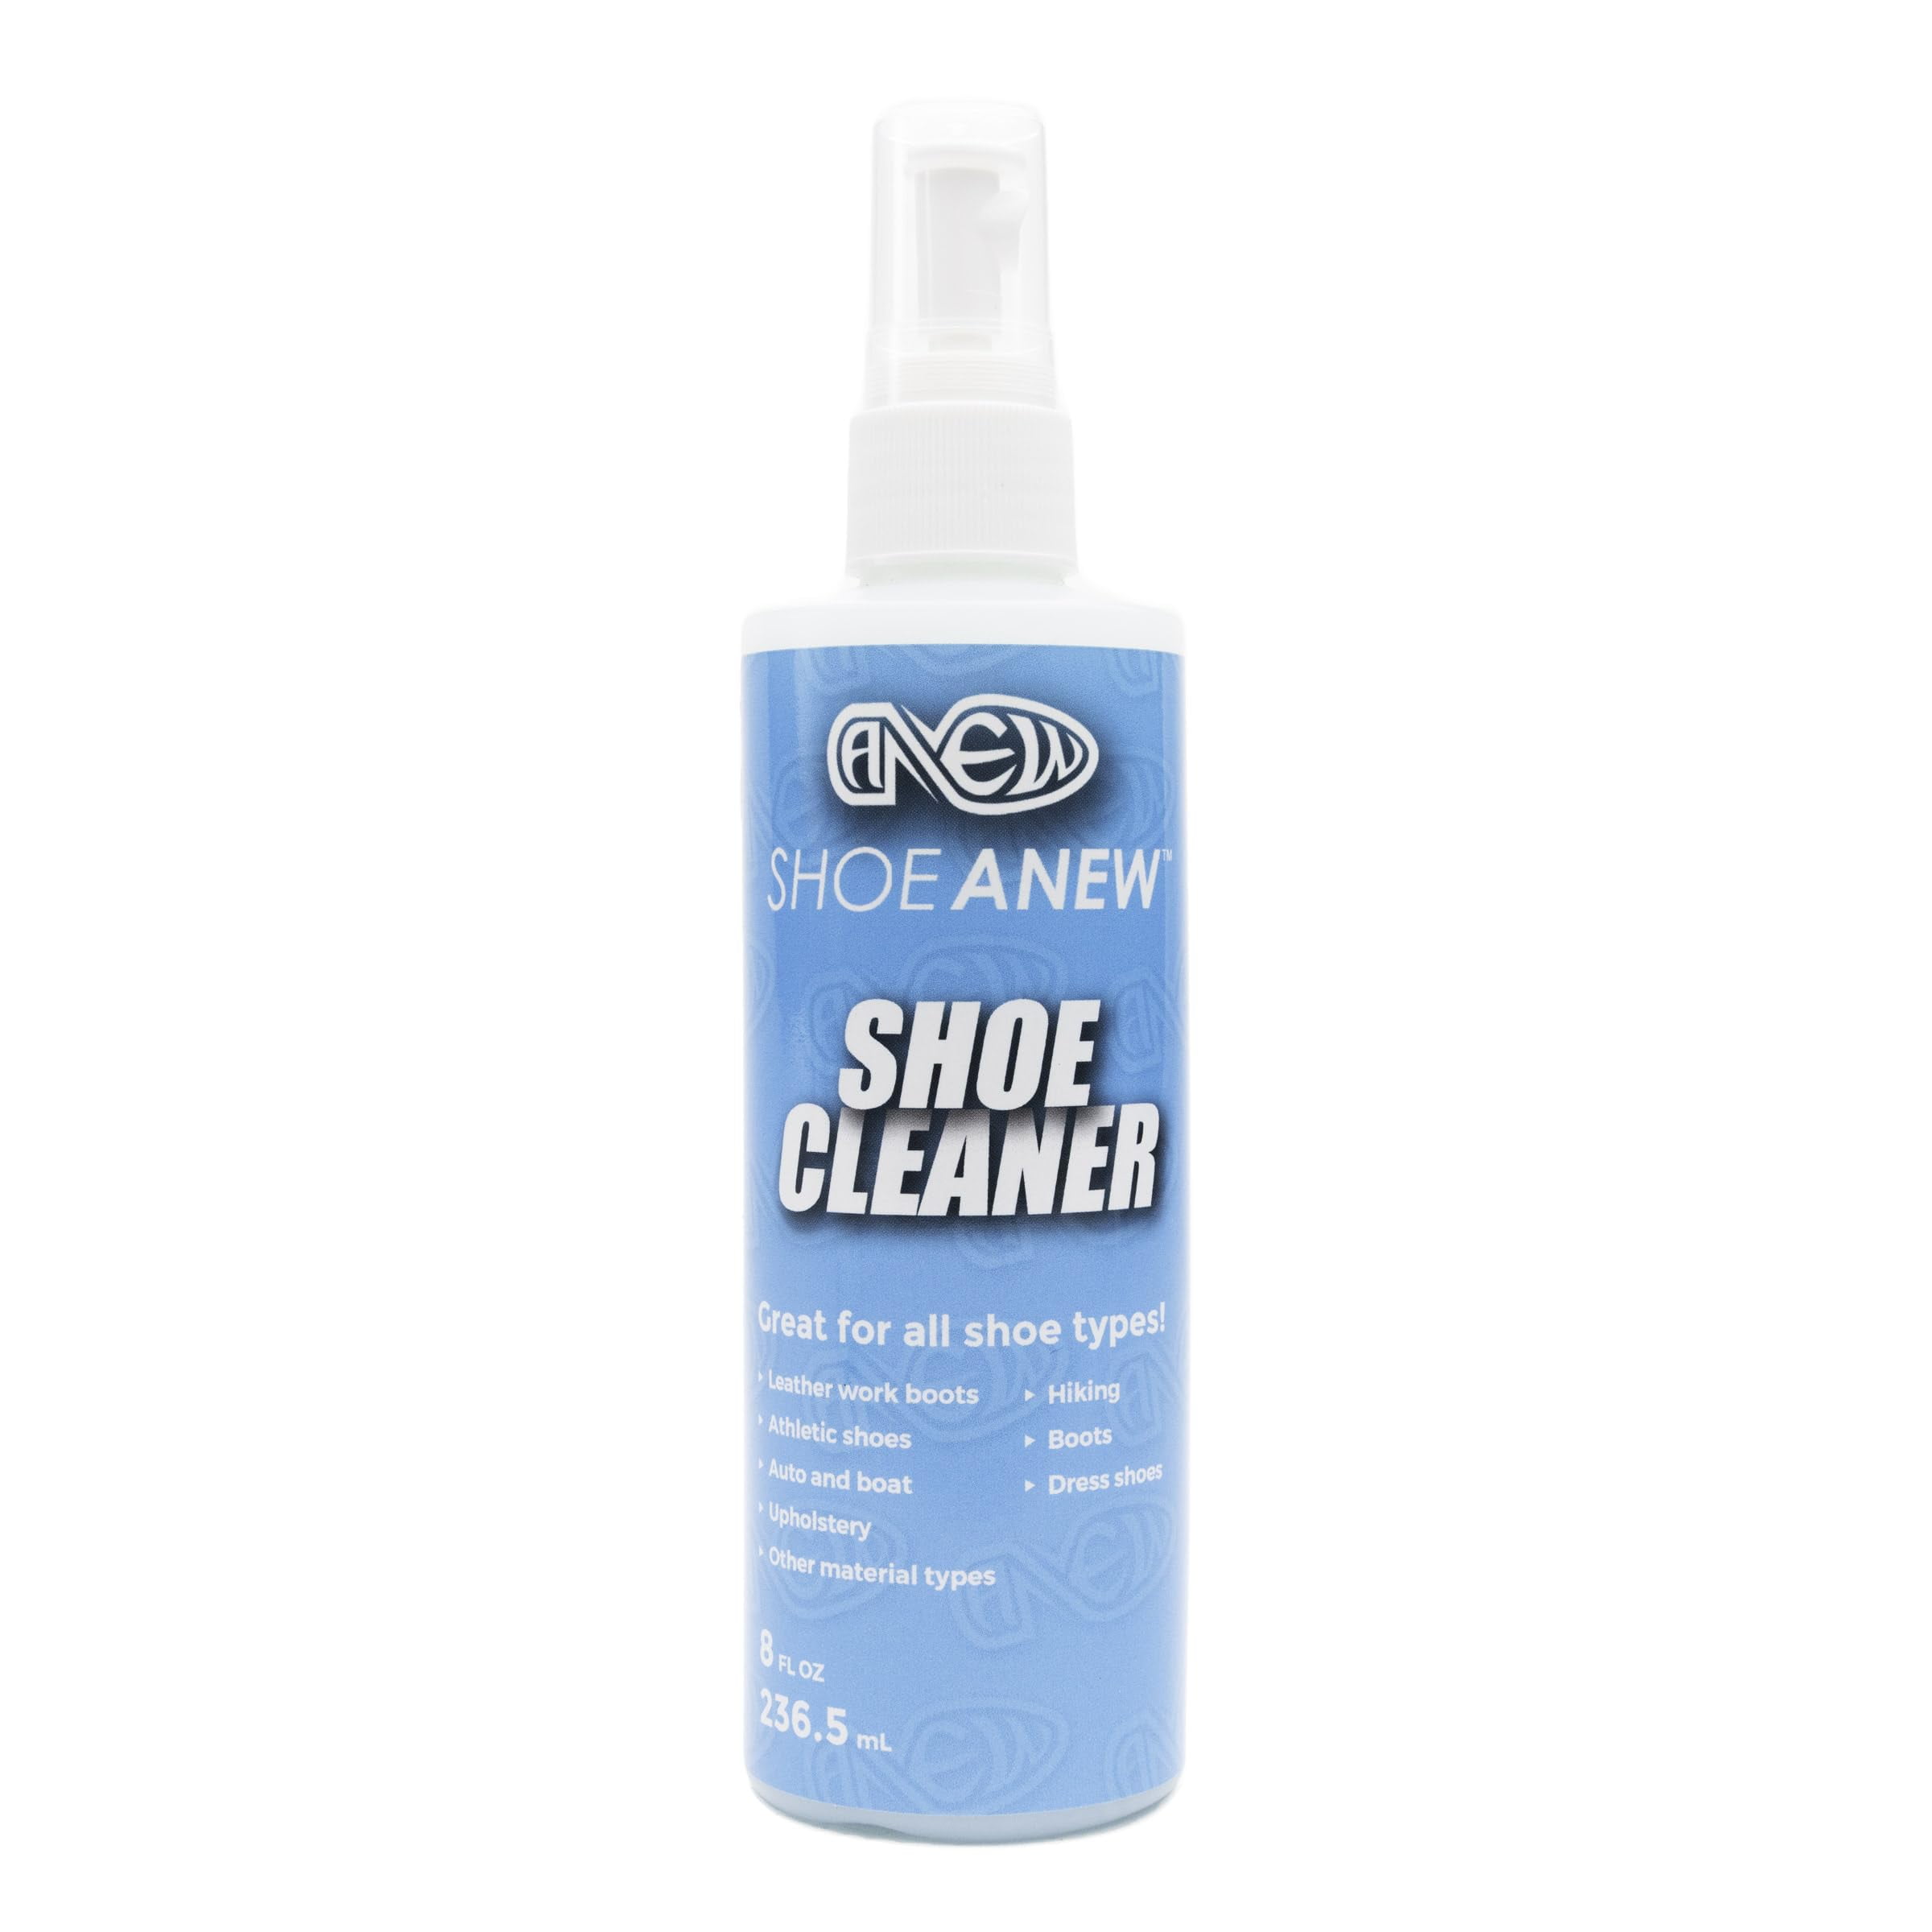 X Sneaker Cleaner Natural Foaming Solution, 6.8 oz - Shoe Cleaning Formula  for all Materials and Colors!